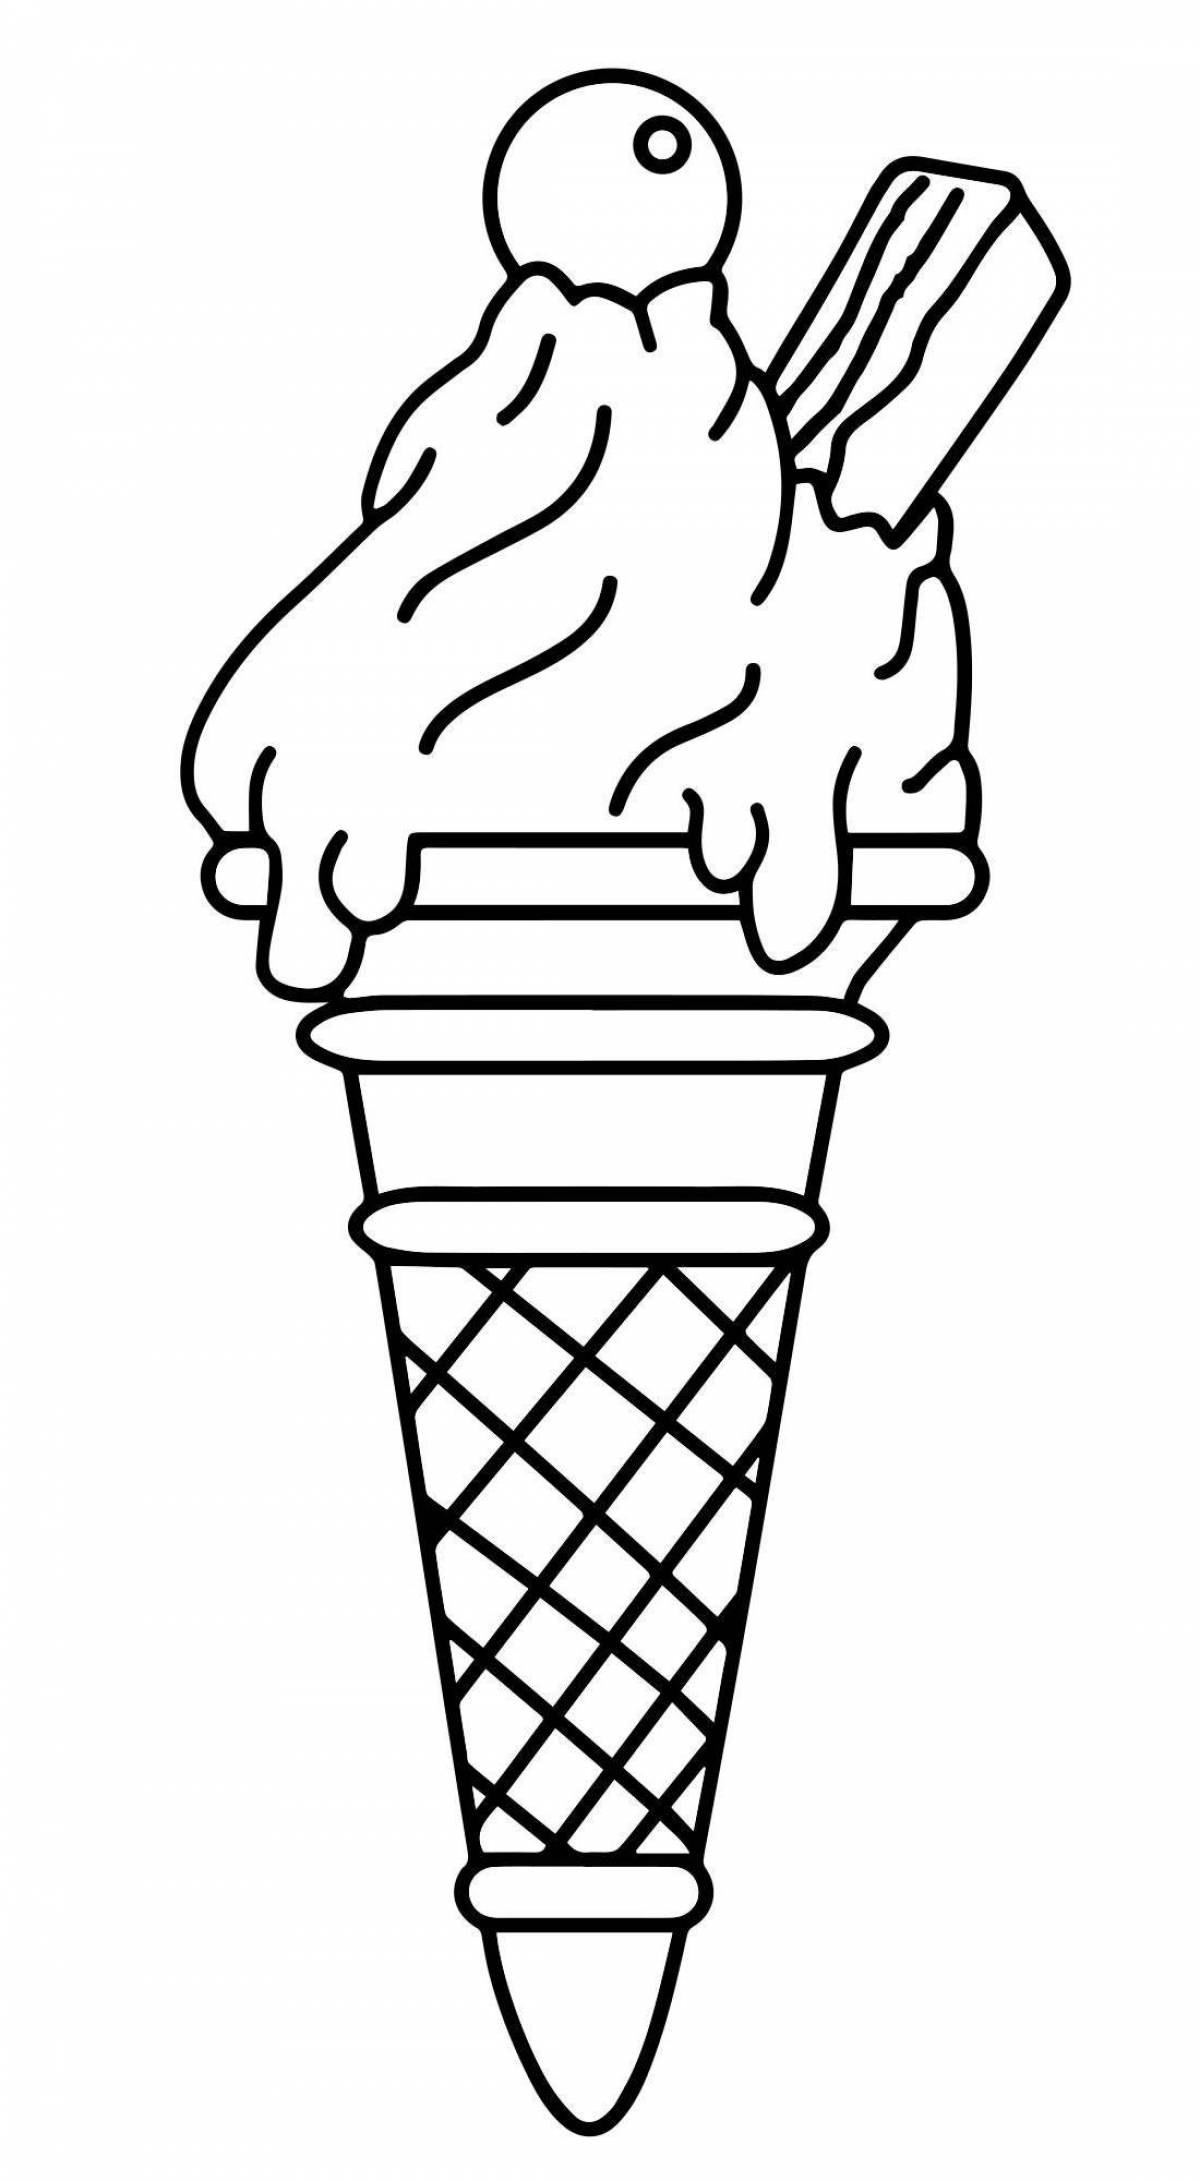 Colouring ice cream with colorful cones